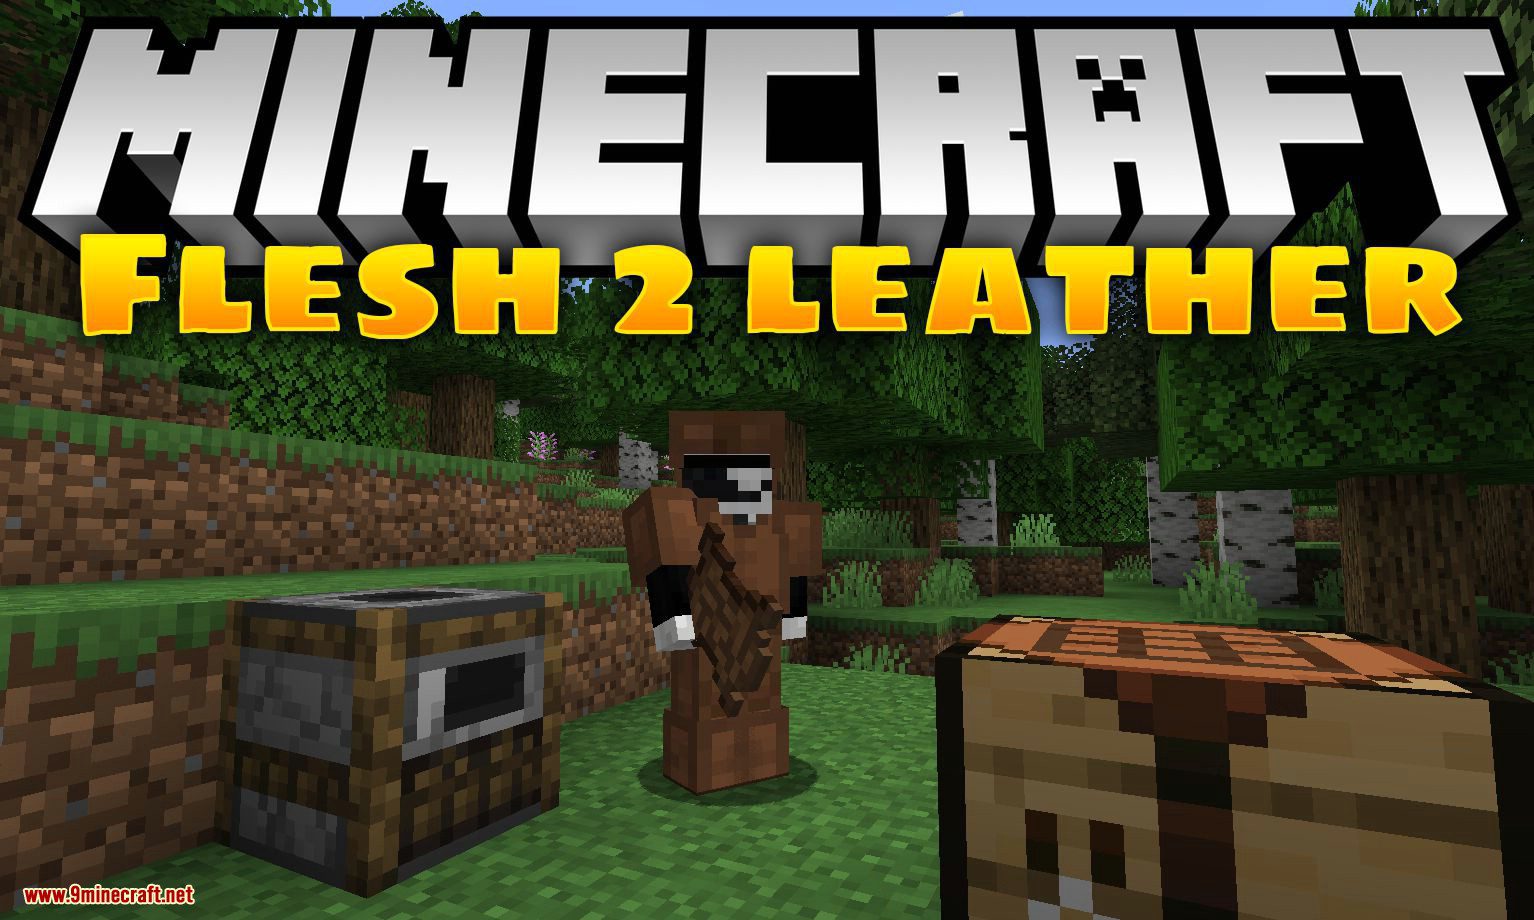 Flesh 2 Leather Mod (1.19, 1.18.2) - Pretty Simple as Its Name 1